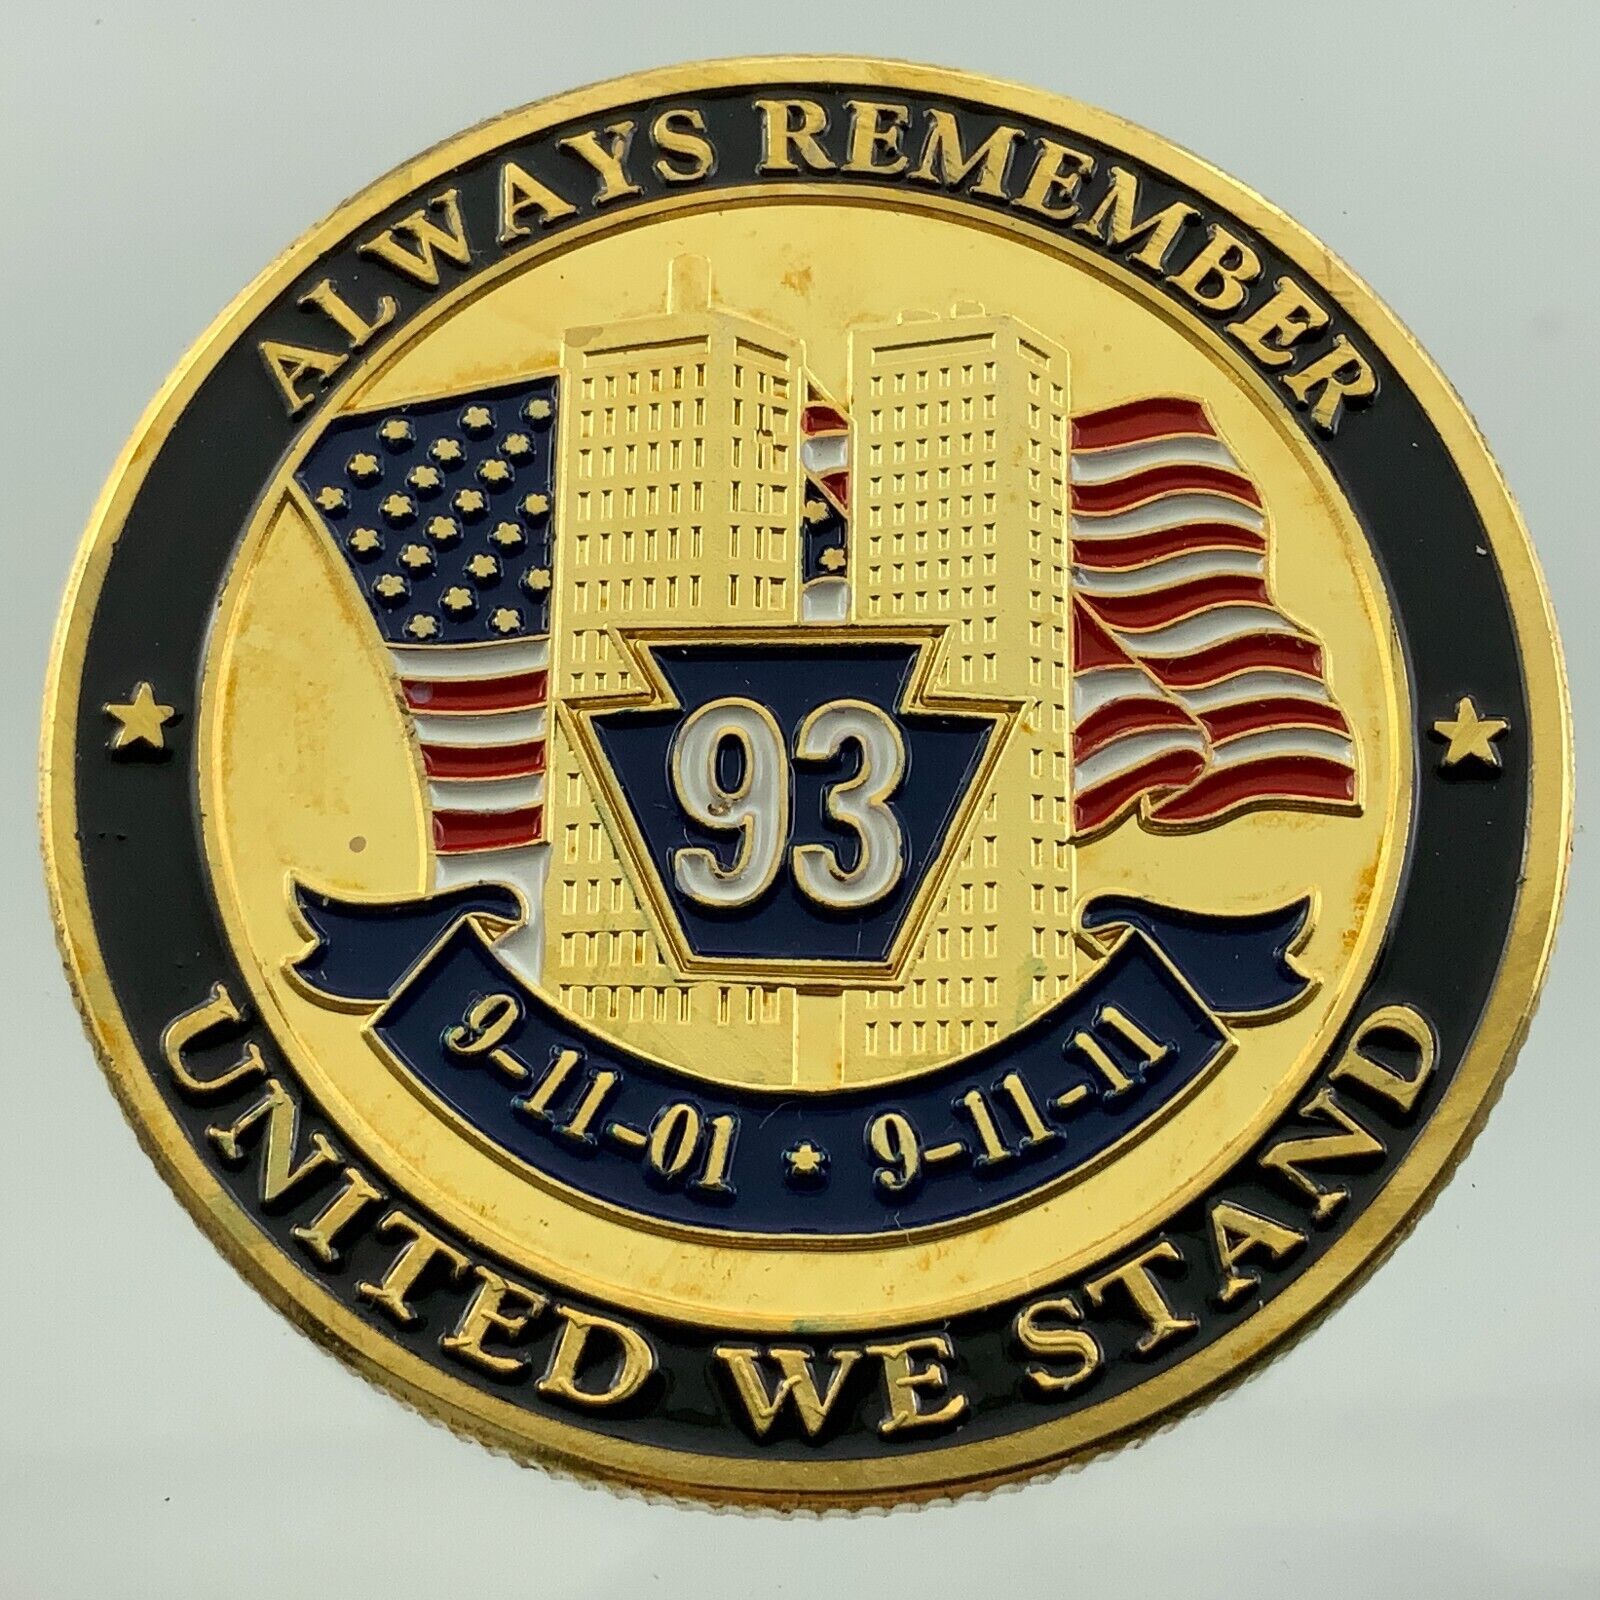 Always Remember United We Stand 93 911 Memorial Medallion Twin Towers EE399